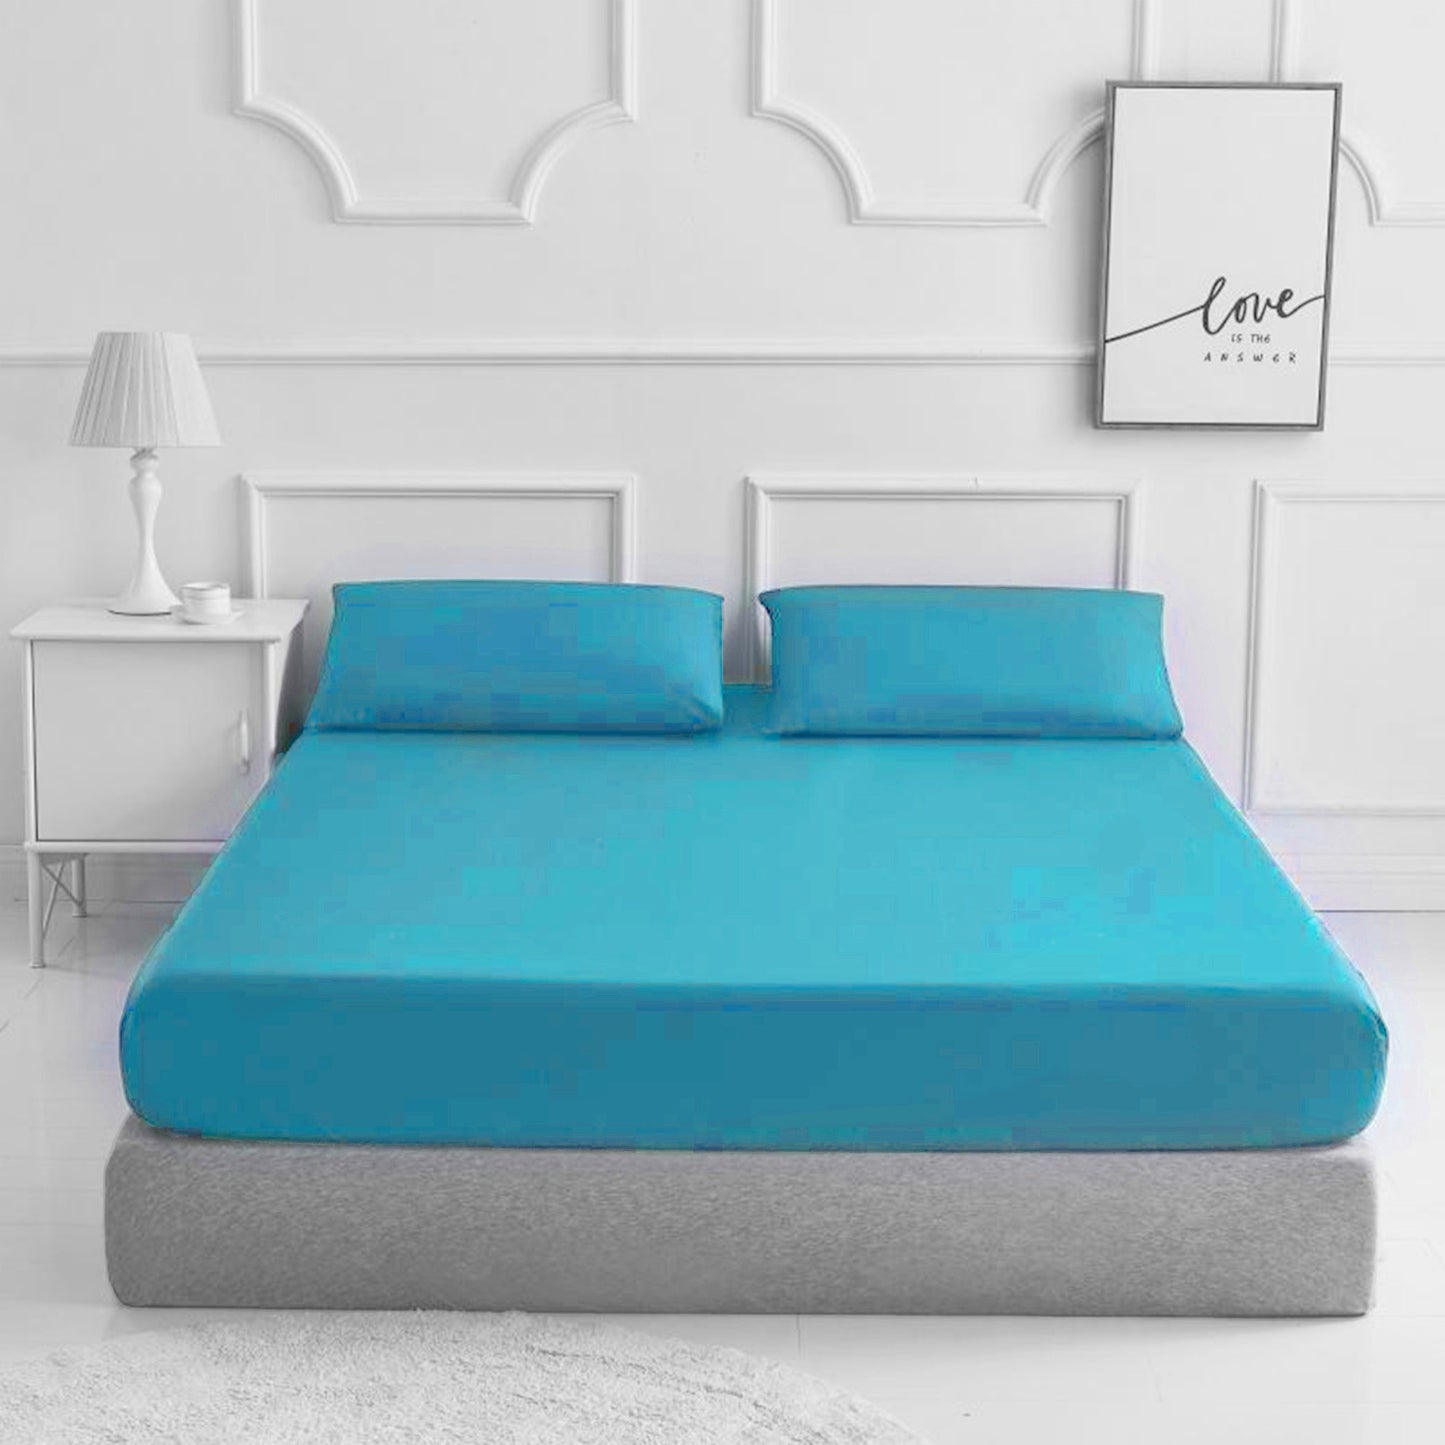 Fitted Bed Sheet Matching FREE 2 X PILLOW CASE Plain Dyed - TheComfortshop.co.ukBed Sheets0721718963684thecomfortshopTheComfortshop.co.ukPC FIT FREE PP Teal KingTealKingFitted Bed Sheet Matching FREE 2 X PILLOW CASE Plain Dyed - TheComfortshop.co.uk